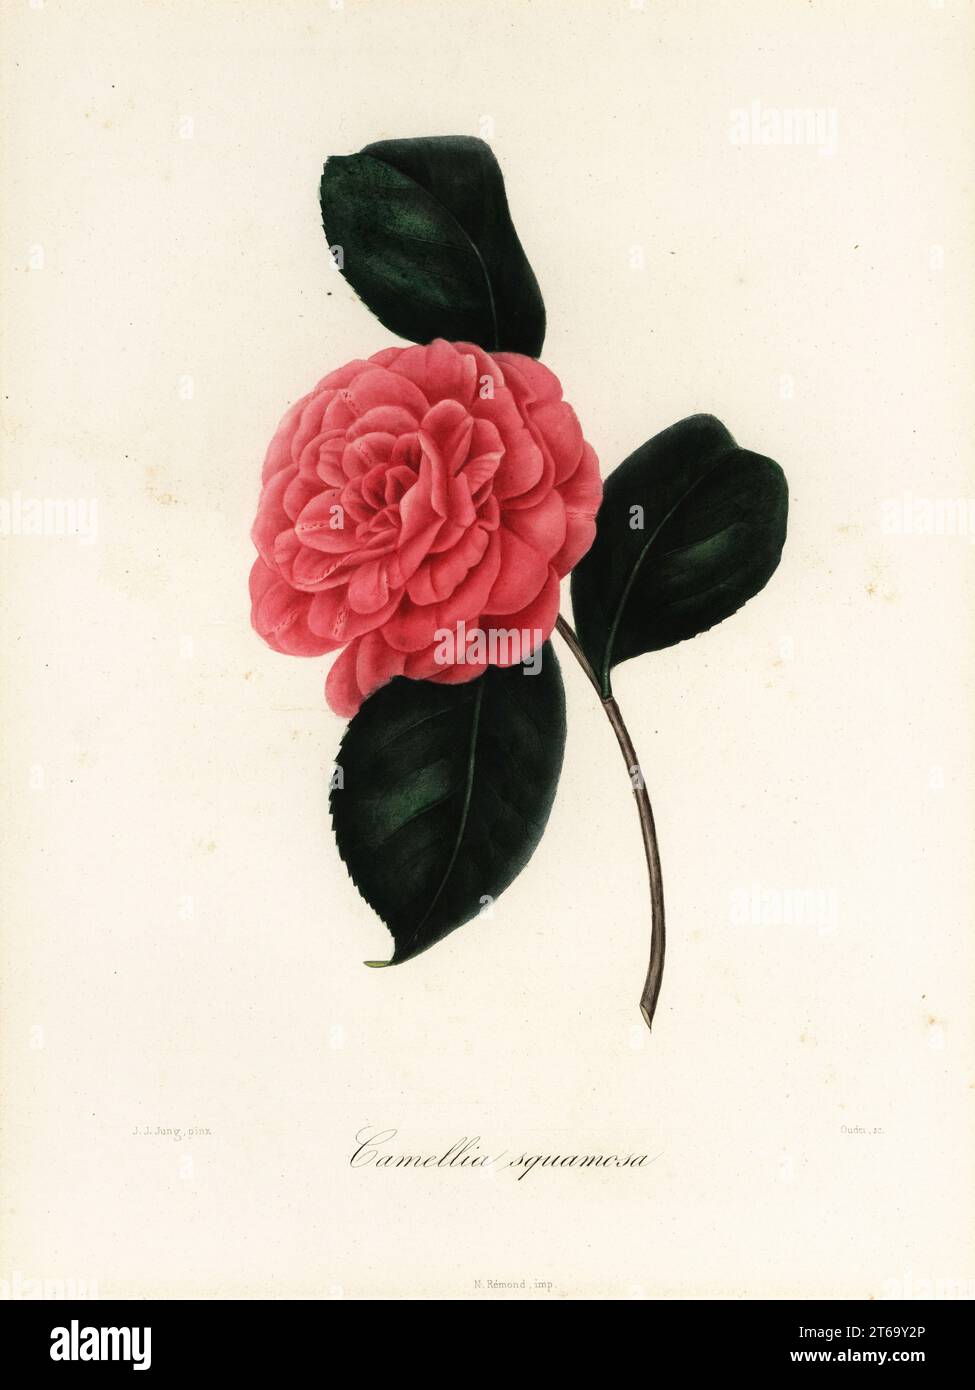 Camellia japonica variety, Camellia squamosa or Camellia squammosa. Produced by Dr. Sacco of Milan in 1838. Handcoloured copperplate stipple engraving by Oudet after a botanical illustration by Johann Jakob Jung from Lorenzo Berleses Iconographie du Genre Camellia, ou description et figures des camellia les plus beaux et les plus rares, Paris, 1841. Stock Photo